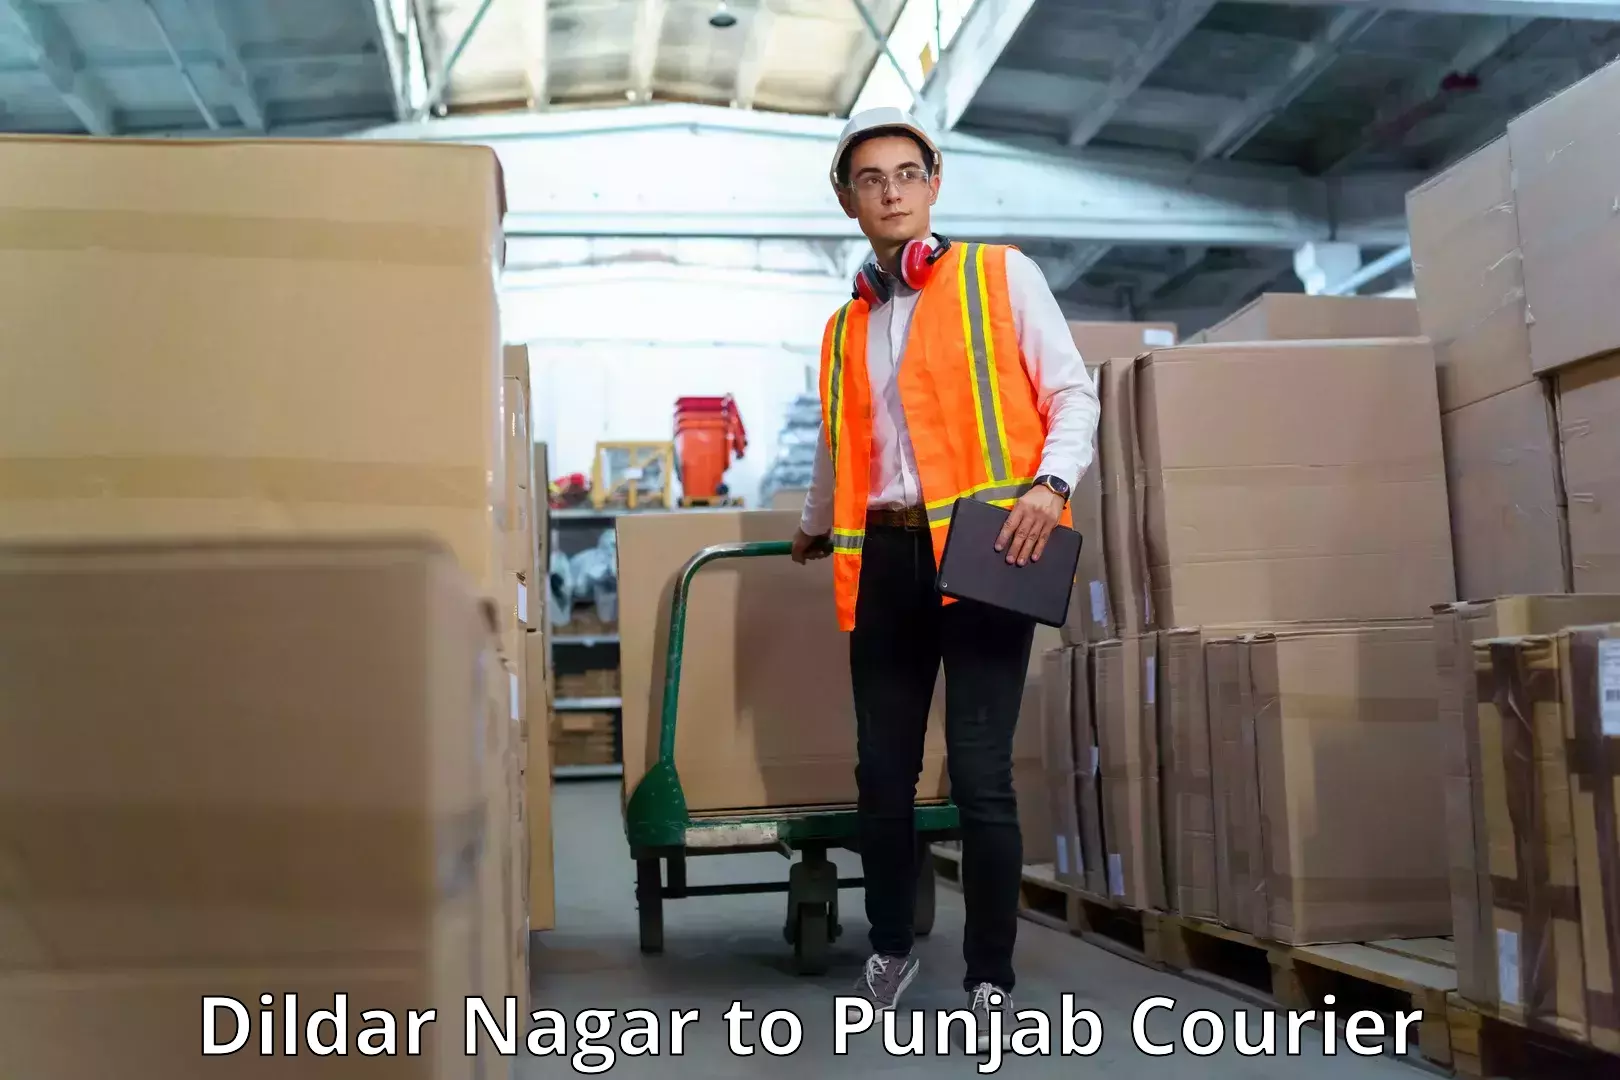 State-of-the-art courier technology Dildar Nagar to Ludhiana